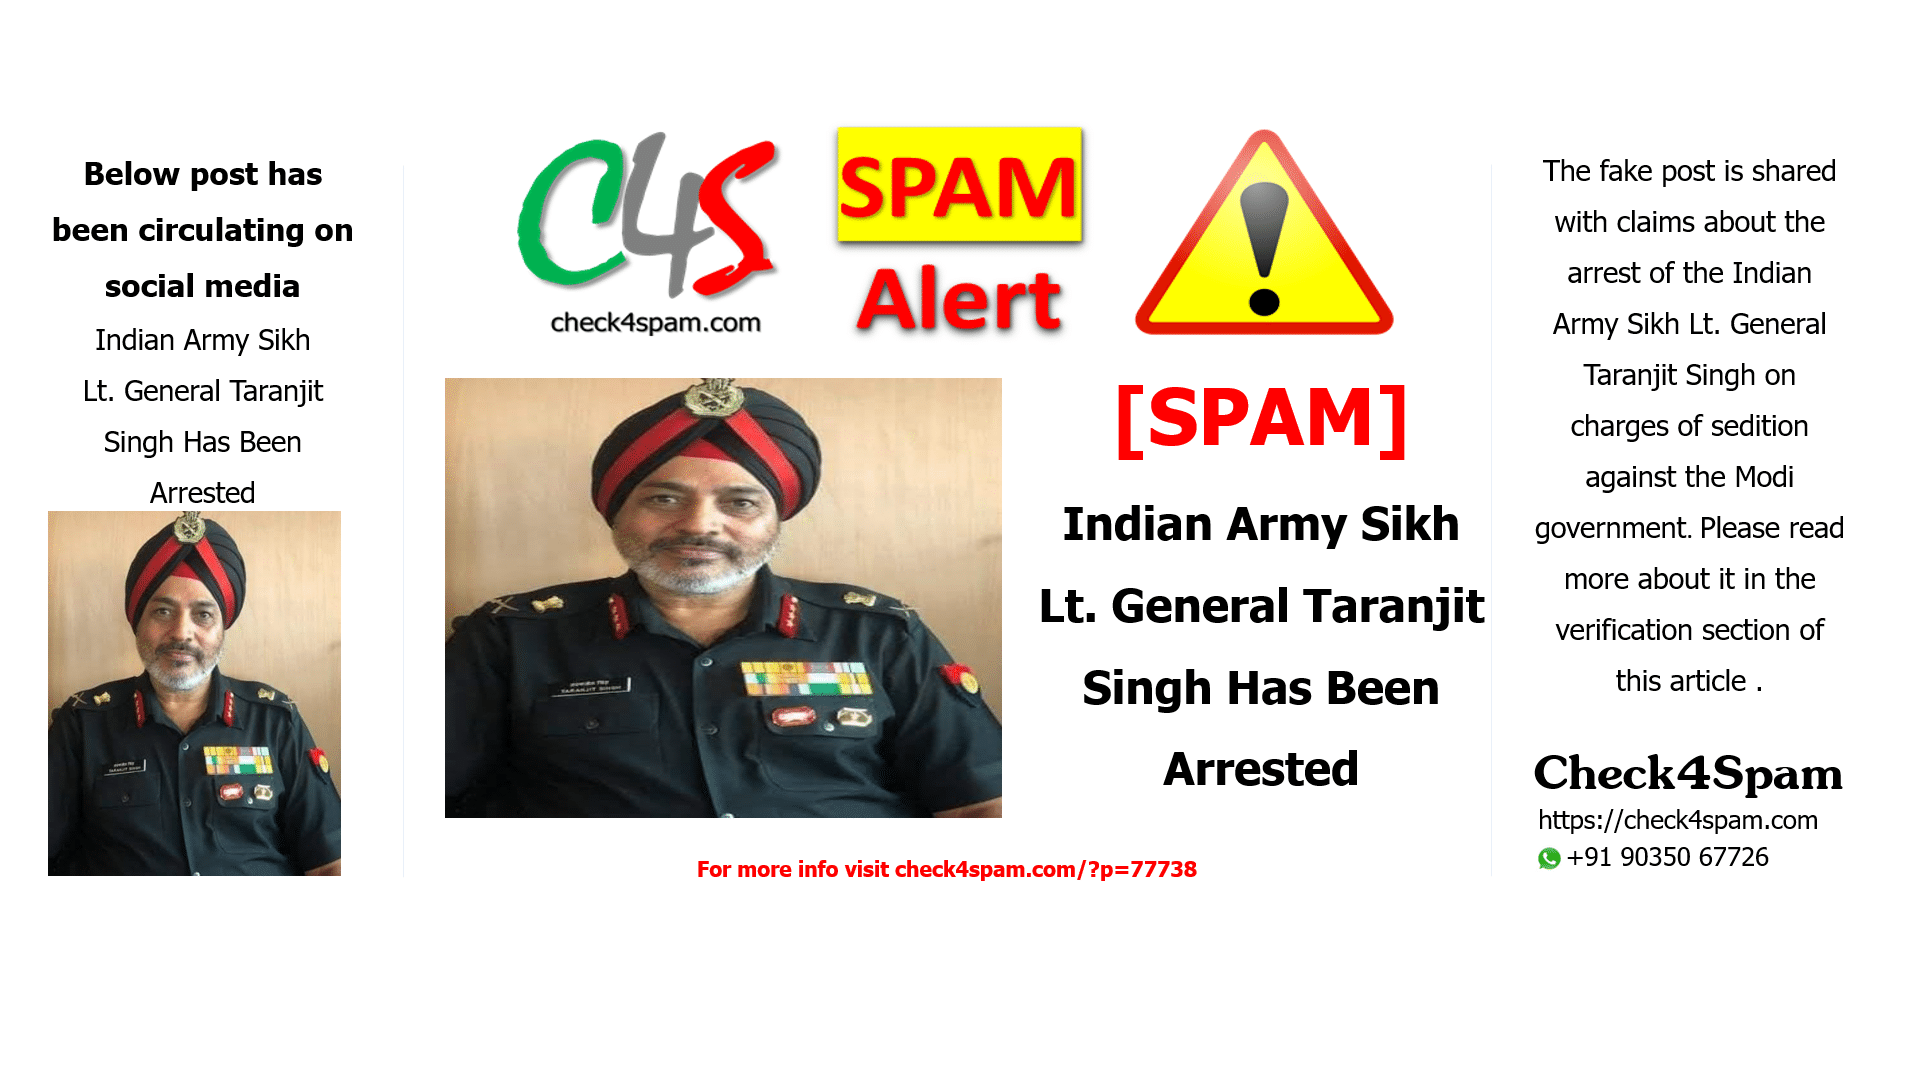 Indian Army Sikh Lt. General Taranjit Singh Has Been Arrested